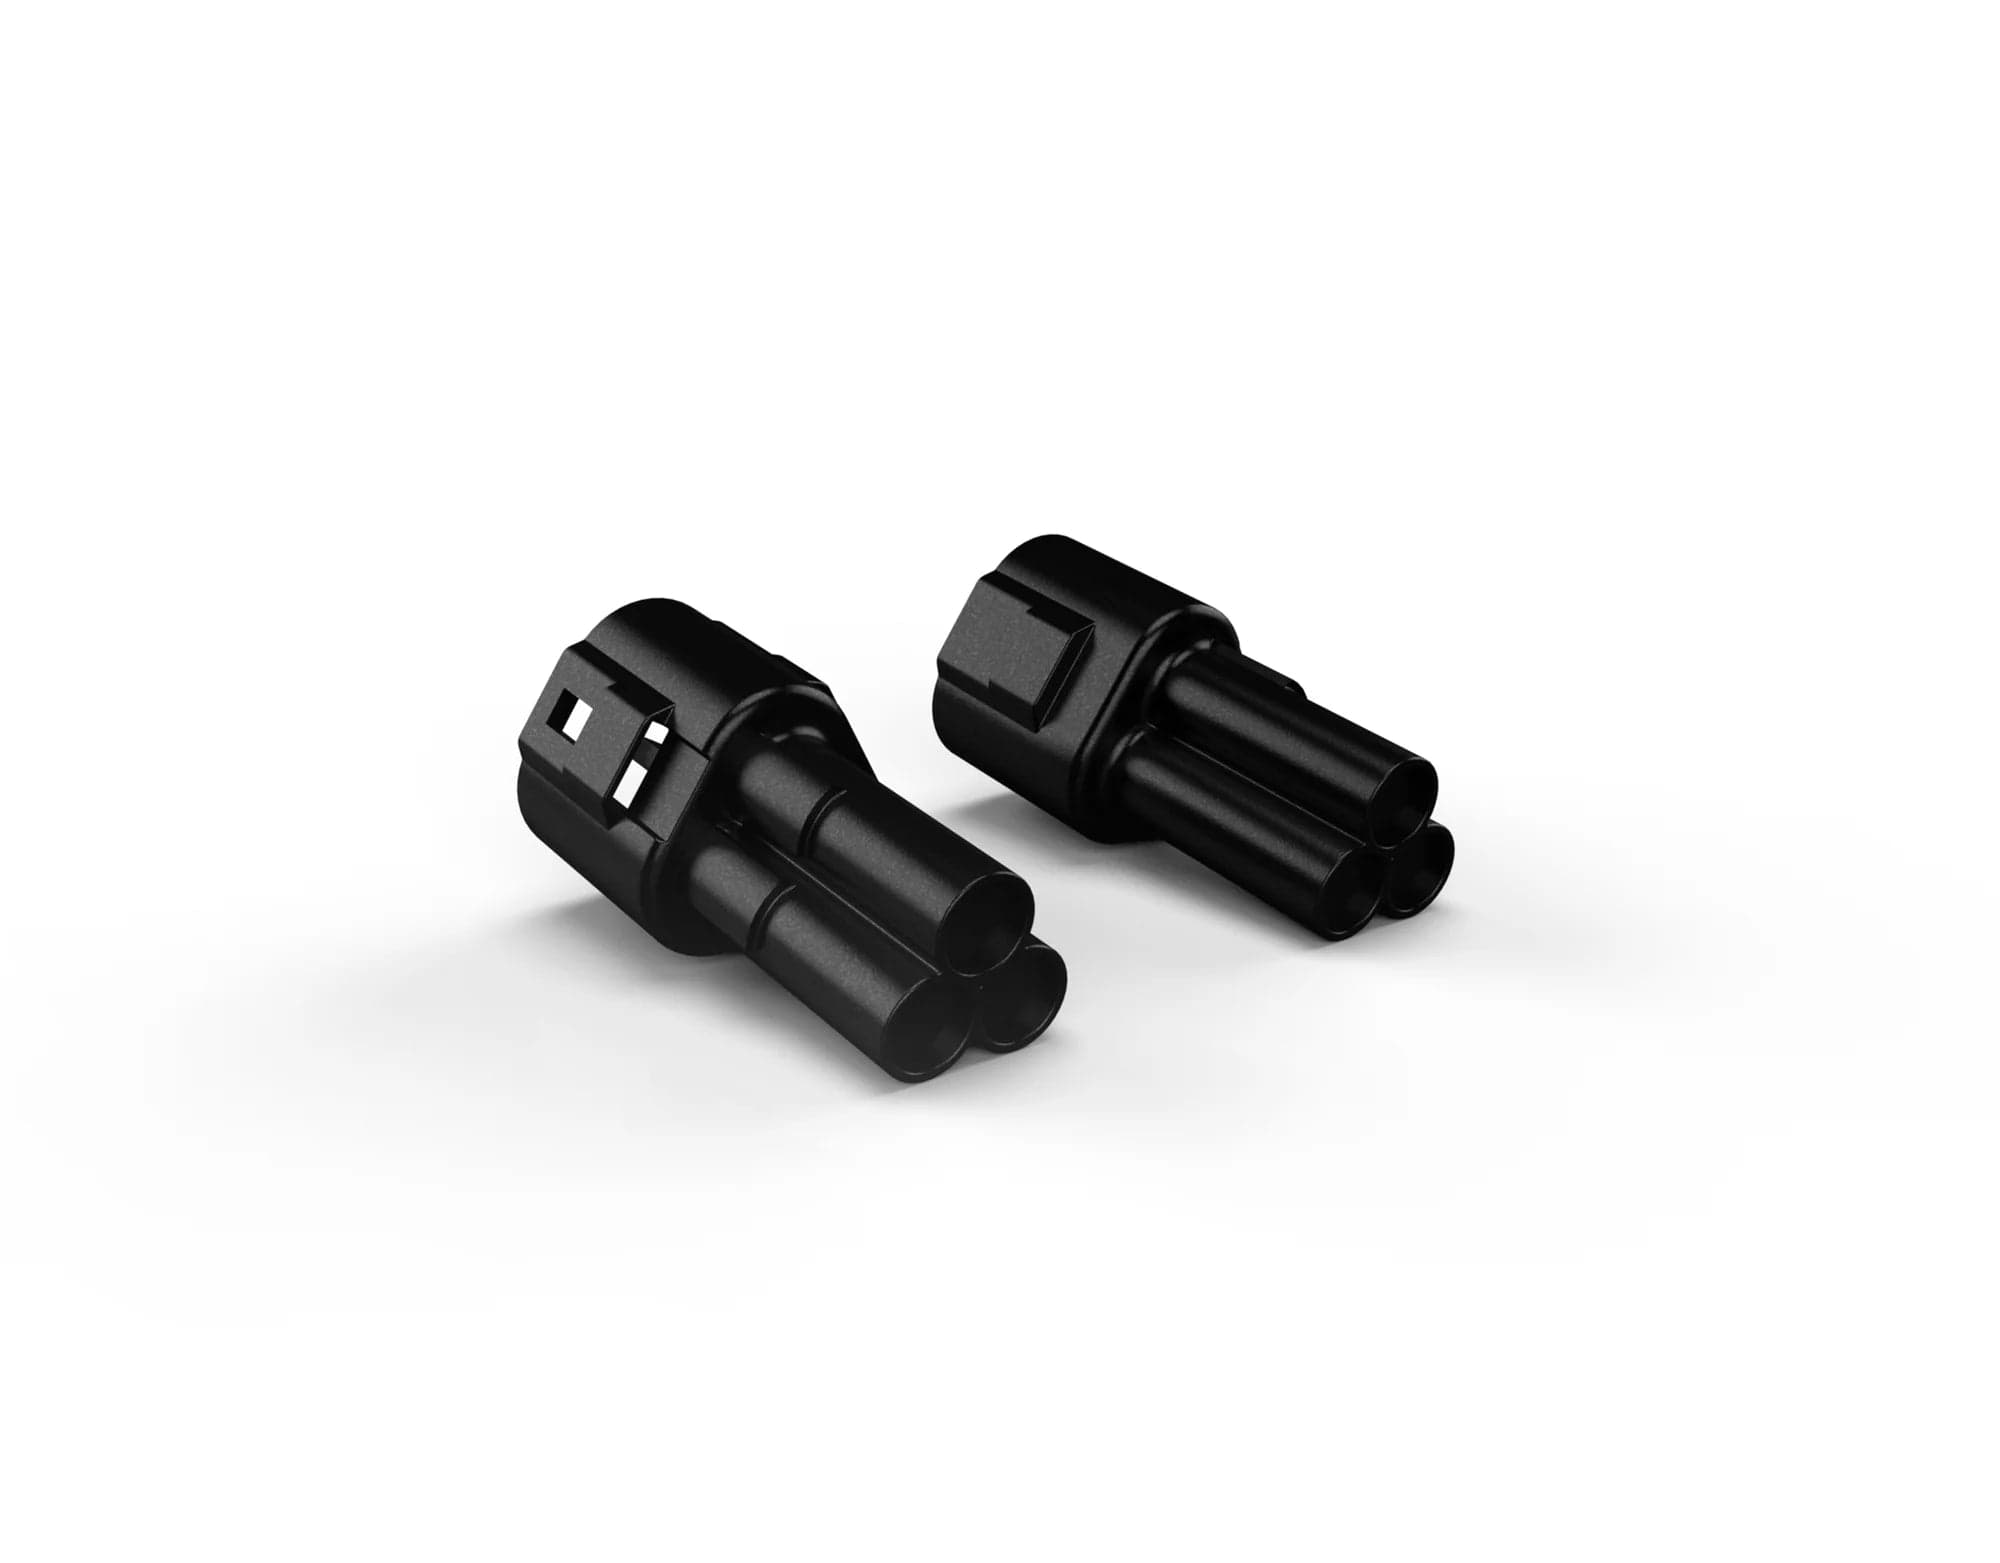 Denali Auxiliary/Driving Light Accessories 3-Pin Waterproof Caps for DENALI CANsmart or DialDim Controller (Pair)